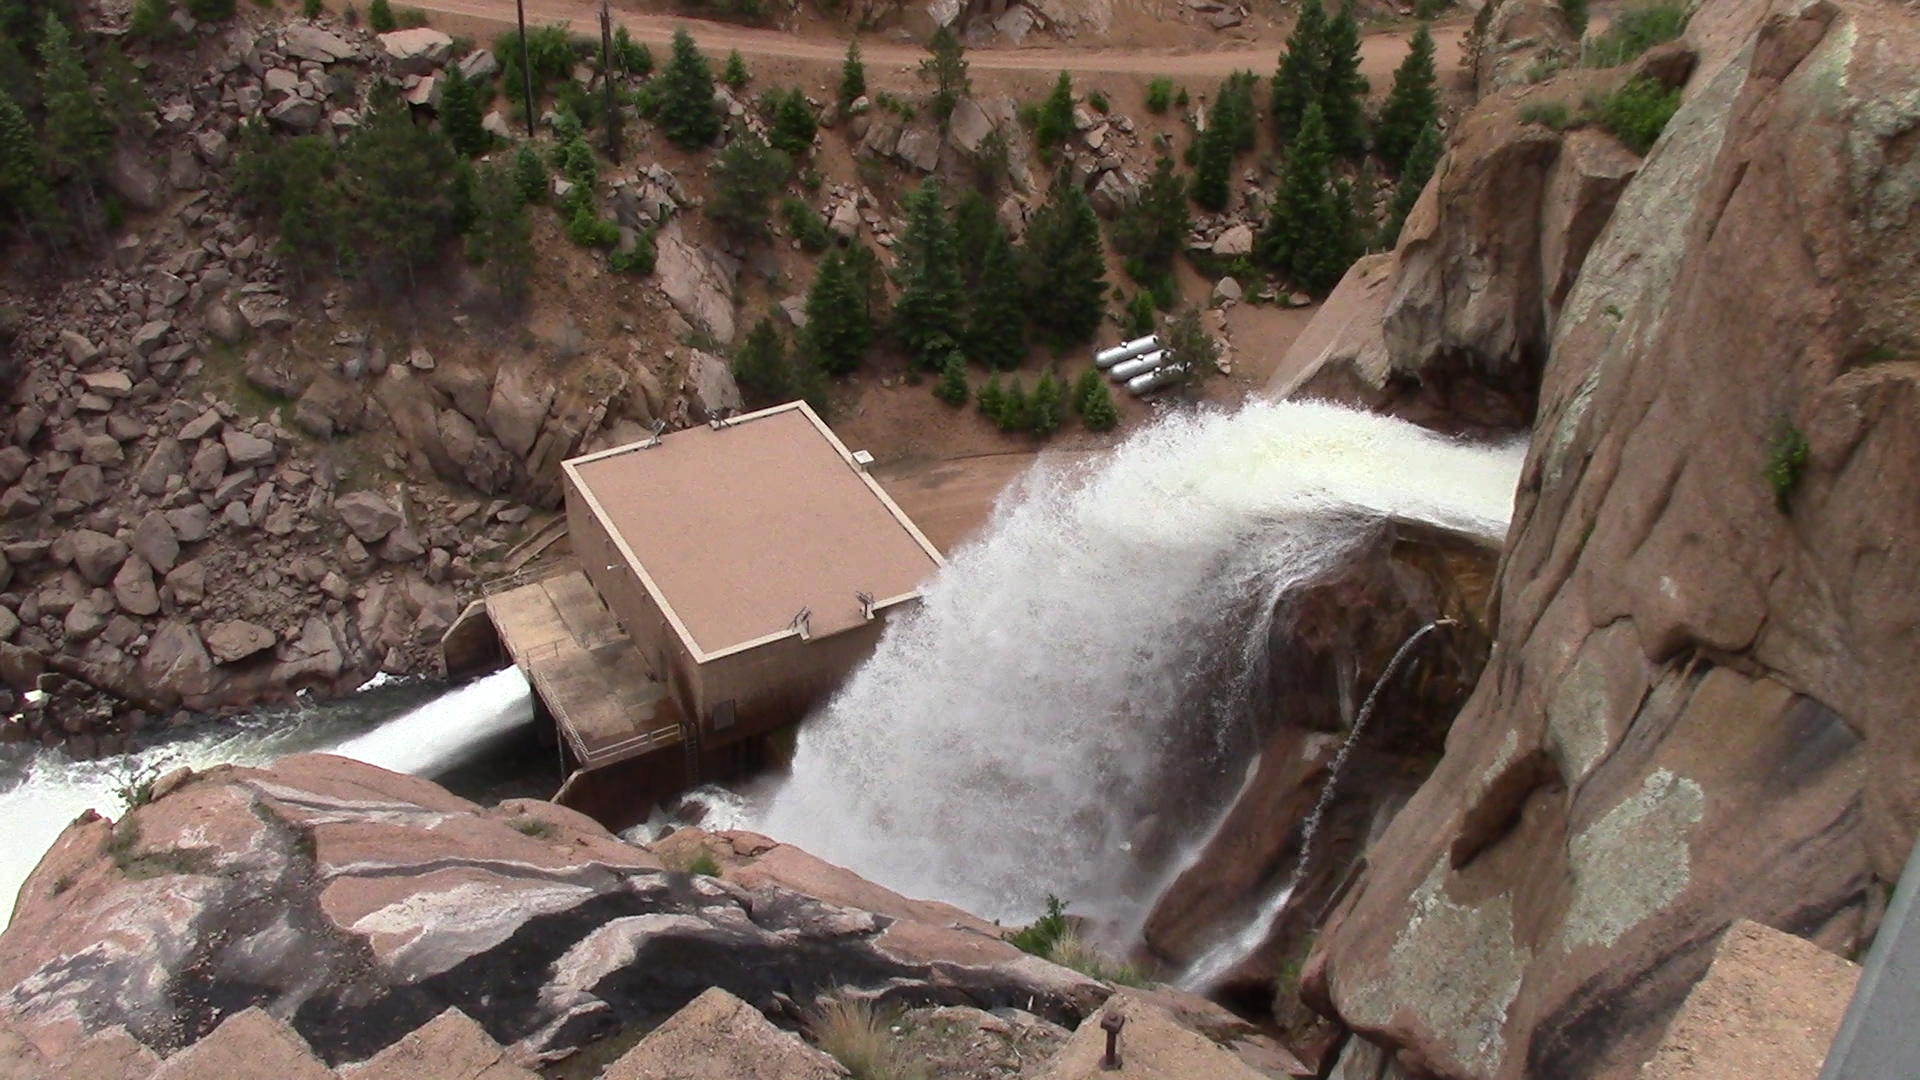 The mid-level jet valve serves as a backup water release and helps fine tune river temperatures below Cheesman Dam.